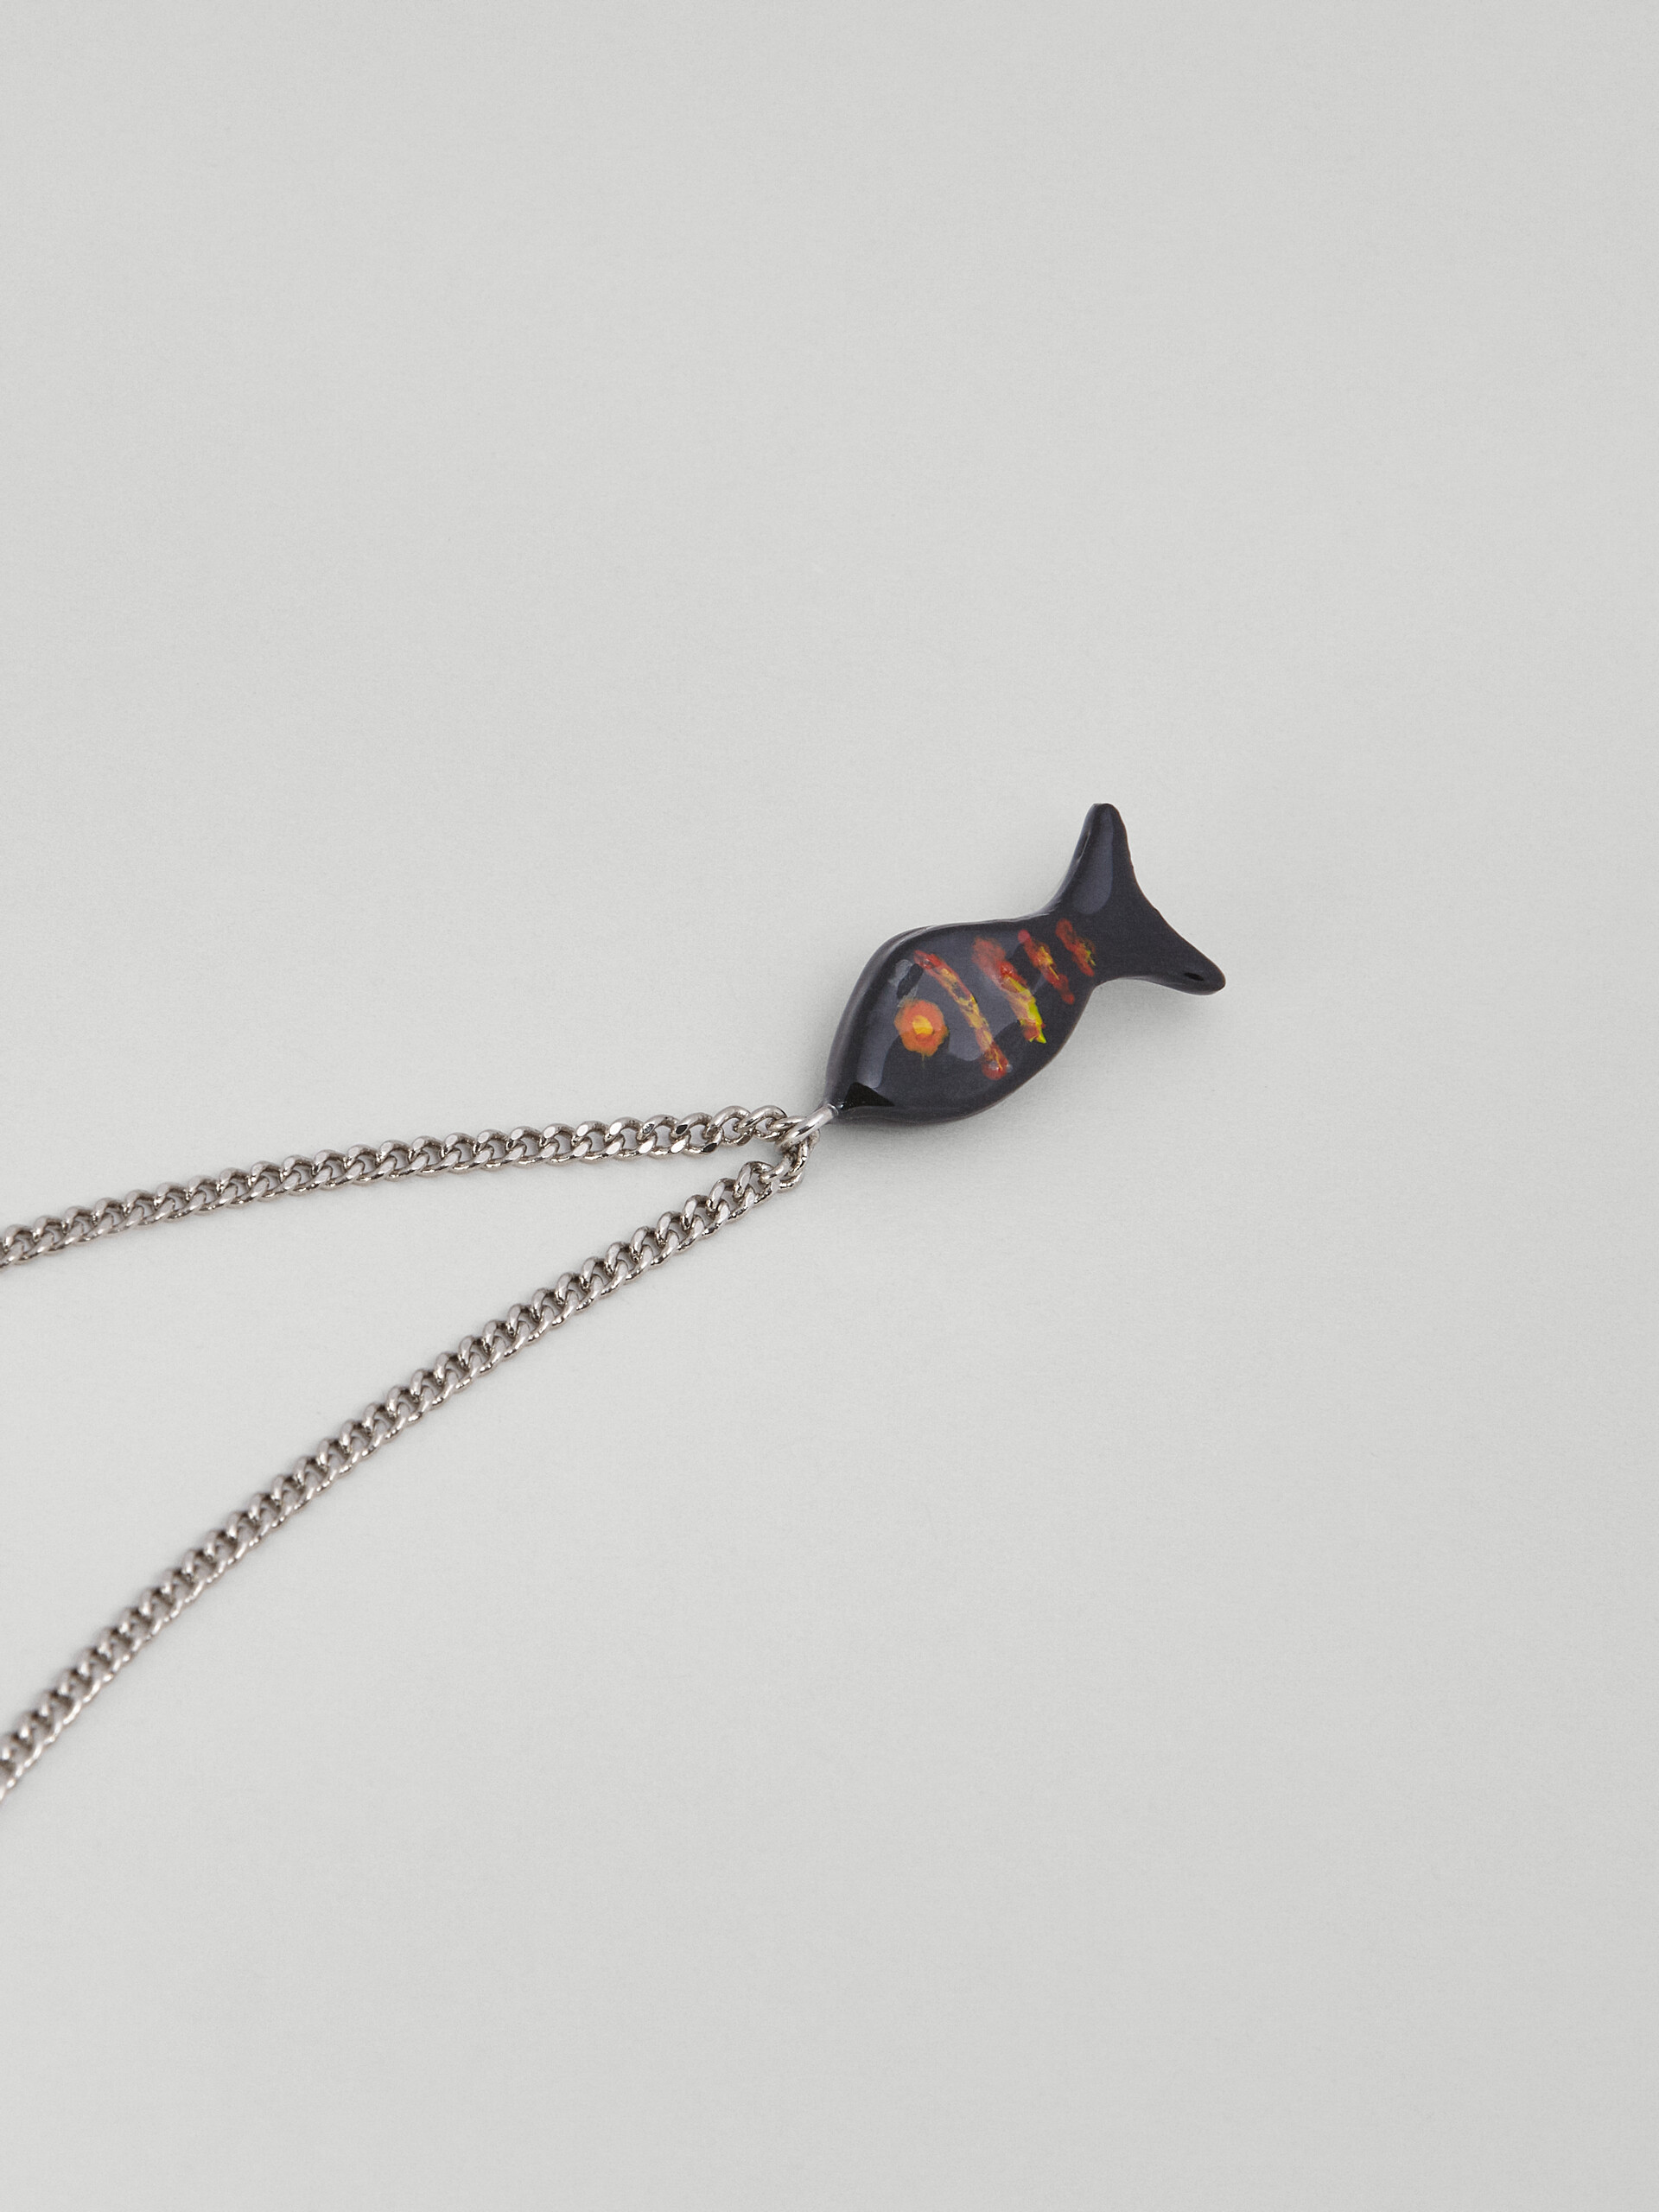 Metal necklace with enamelled fish charm - Necklaces - Image 2